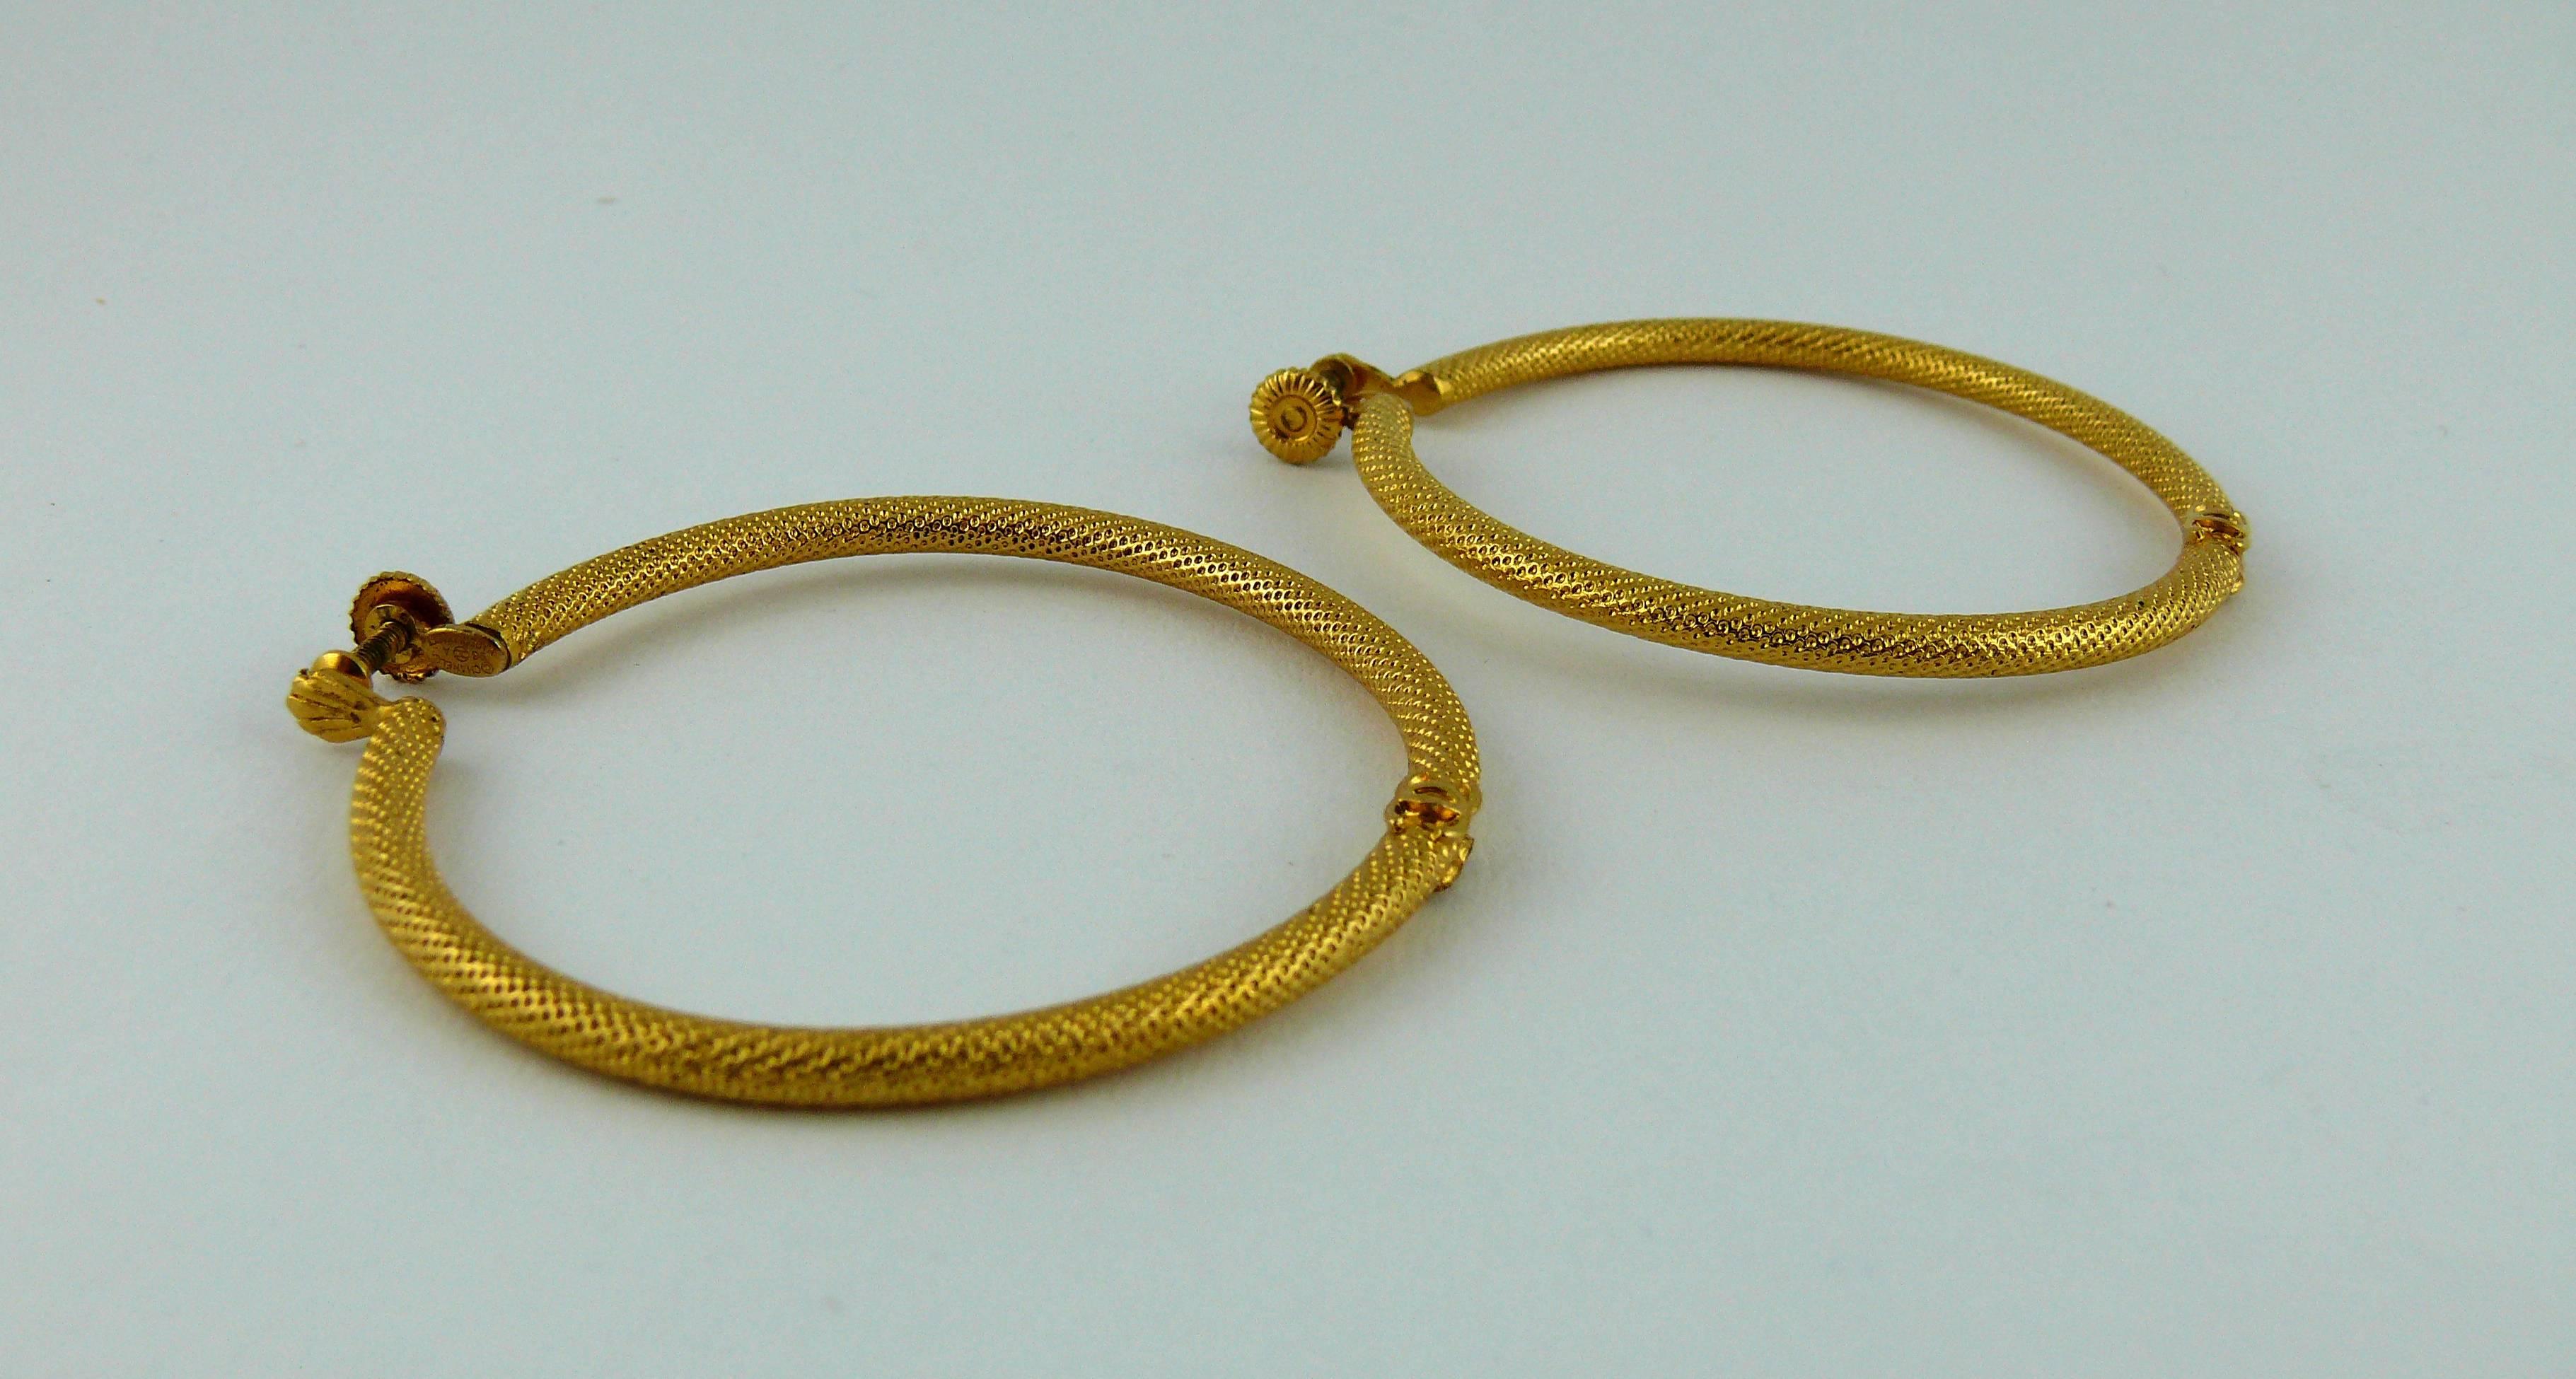 CHANEL vintage textured gold toned hoop earrings with CC monogram.

Screw fastening.

Marked CHANEL 96 A Made in France.

JEWELRY CONDITION CHART
- New or never worn : item is in pristine condition with no noticeable imperfections
- Excellent : item